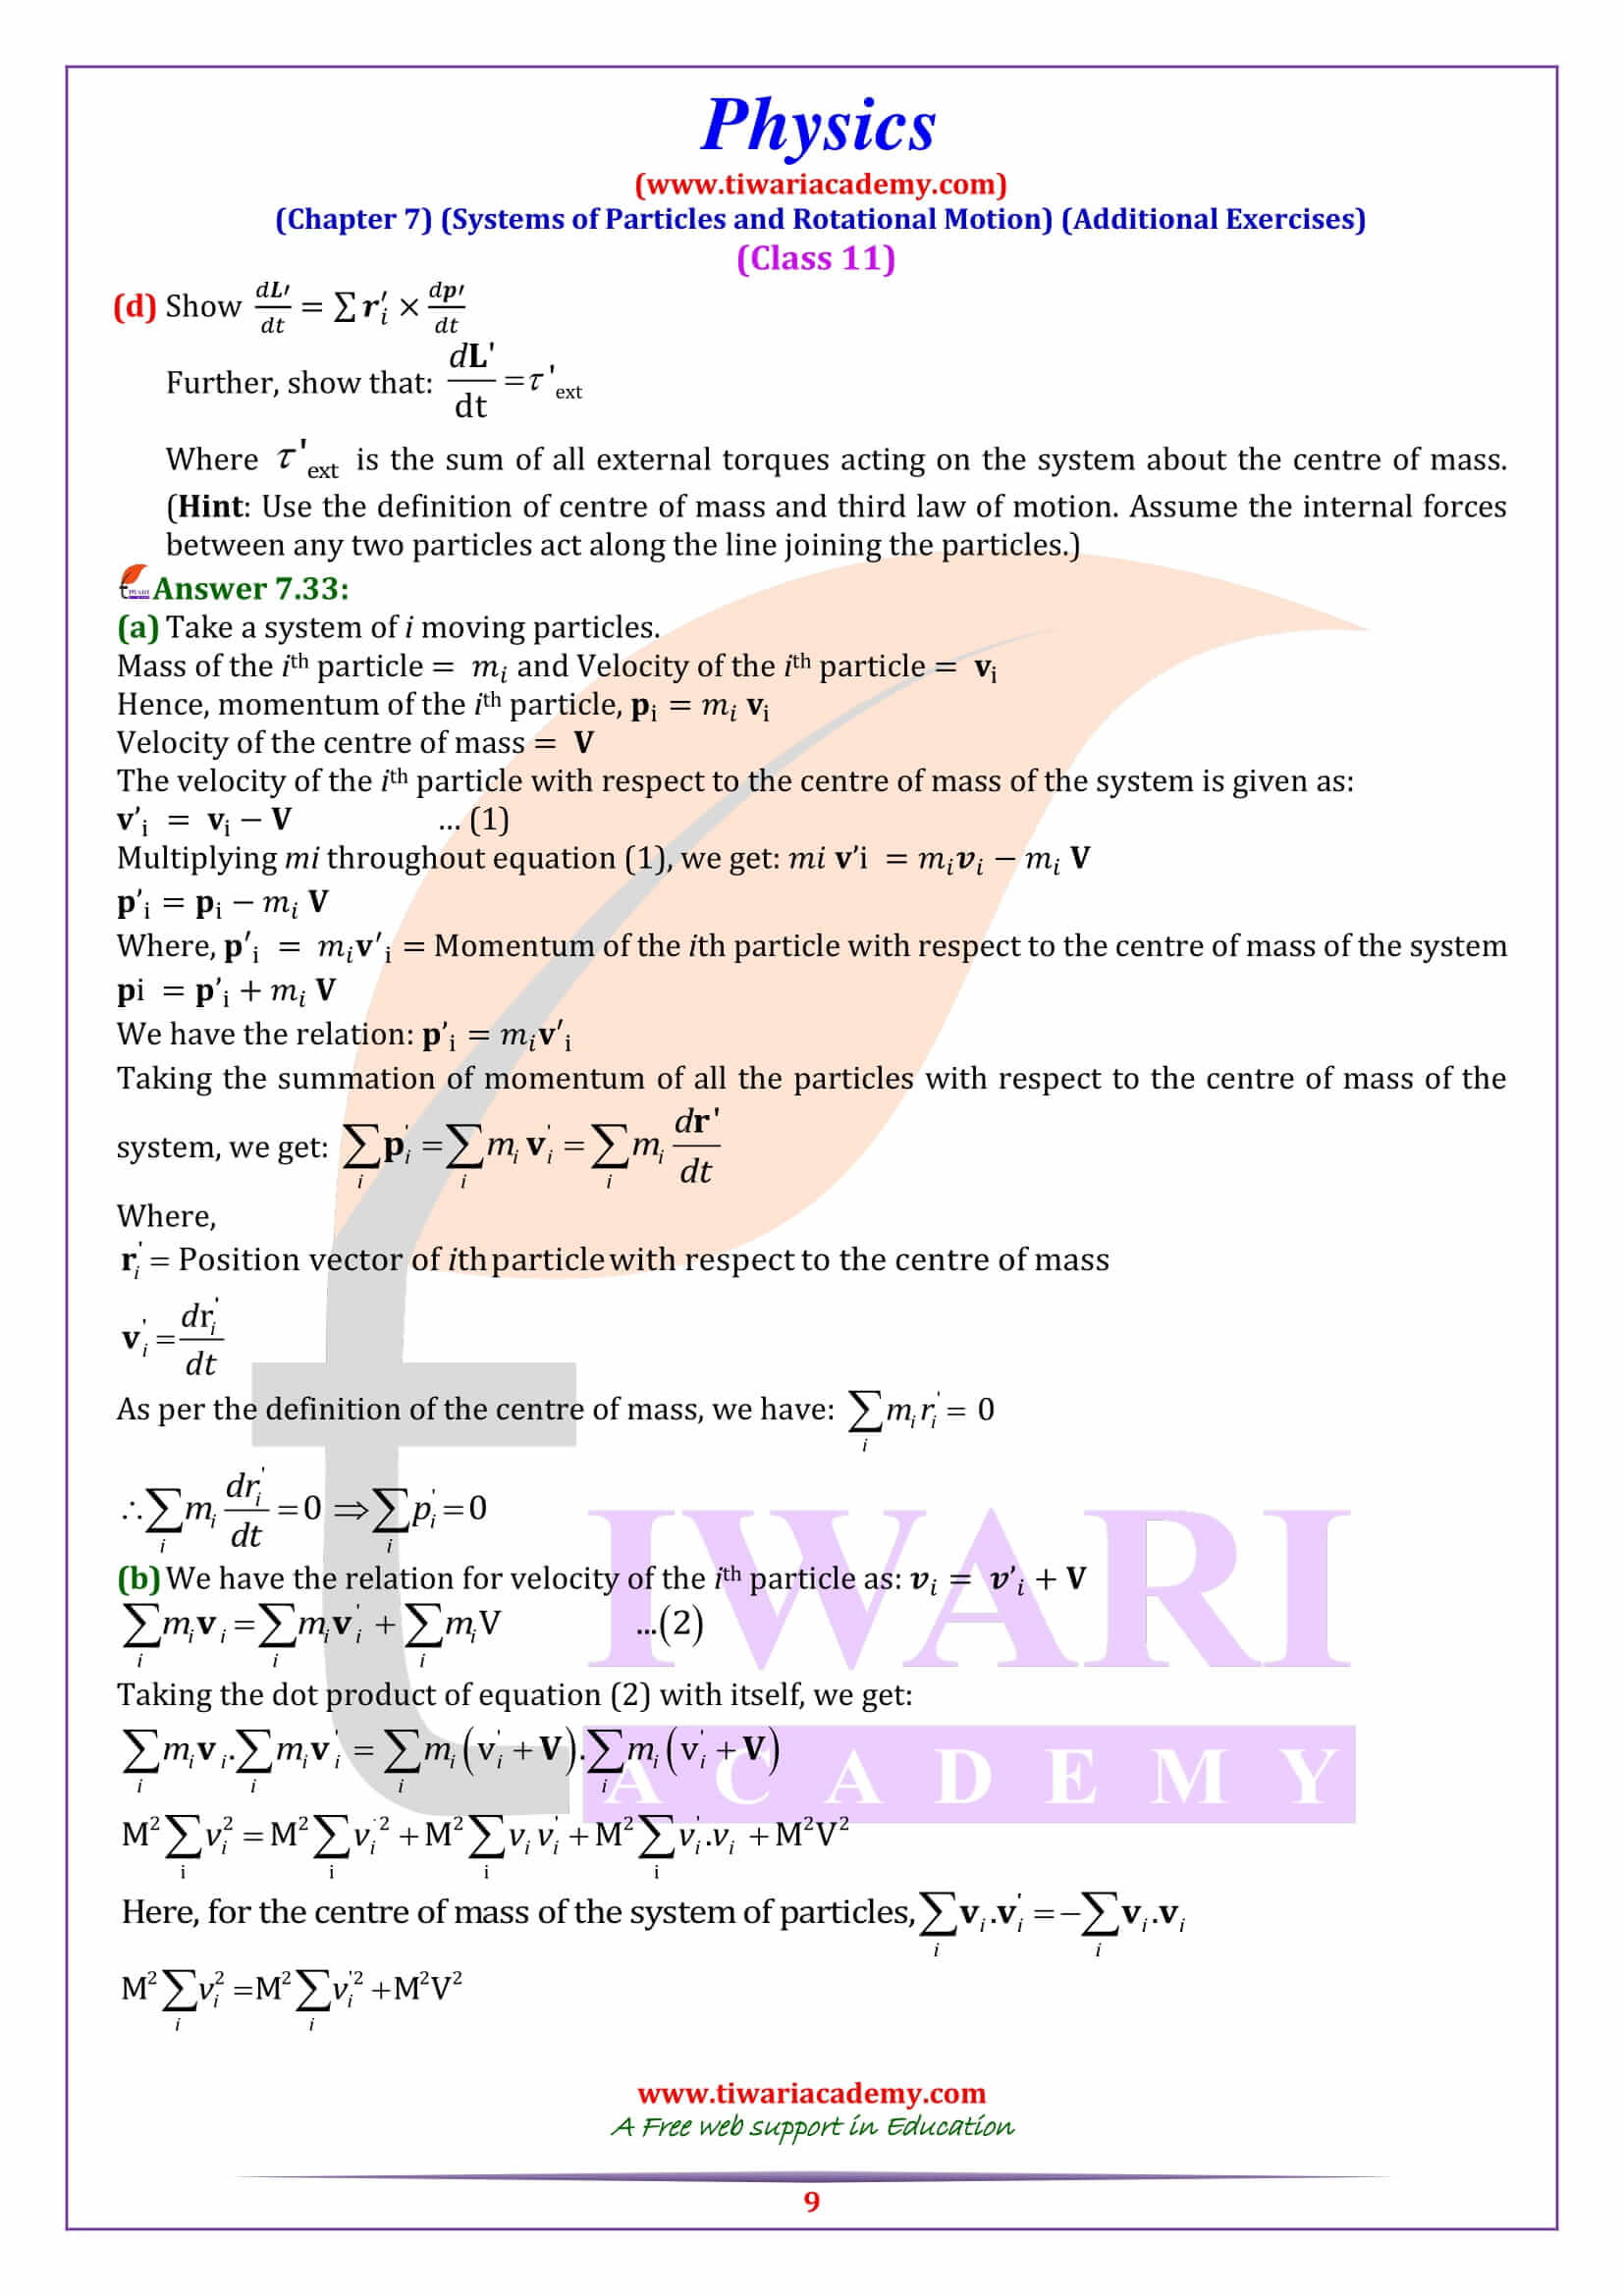 NCERT Solutions for Class 11 Physics Chapter 7 Additional